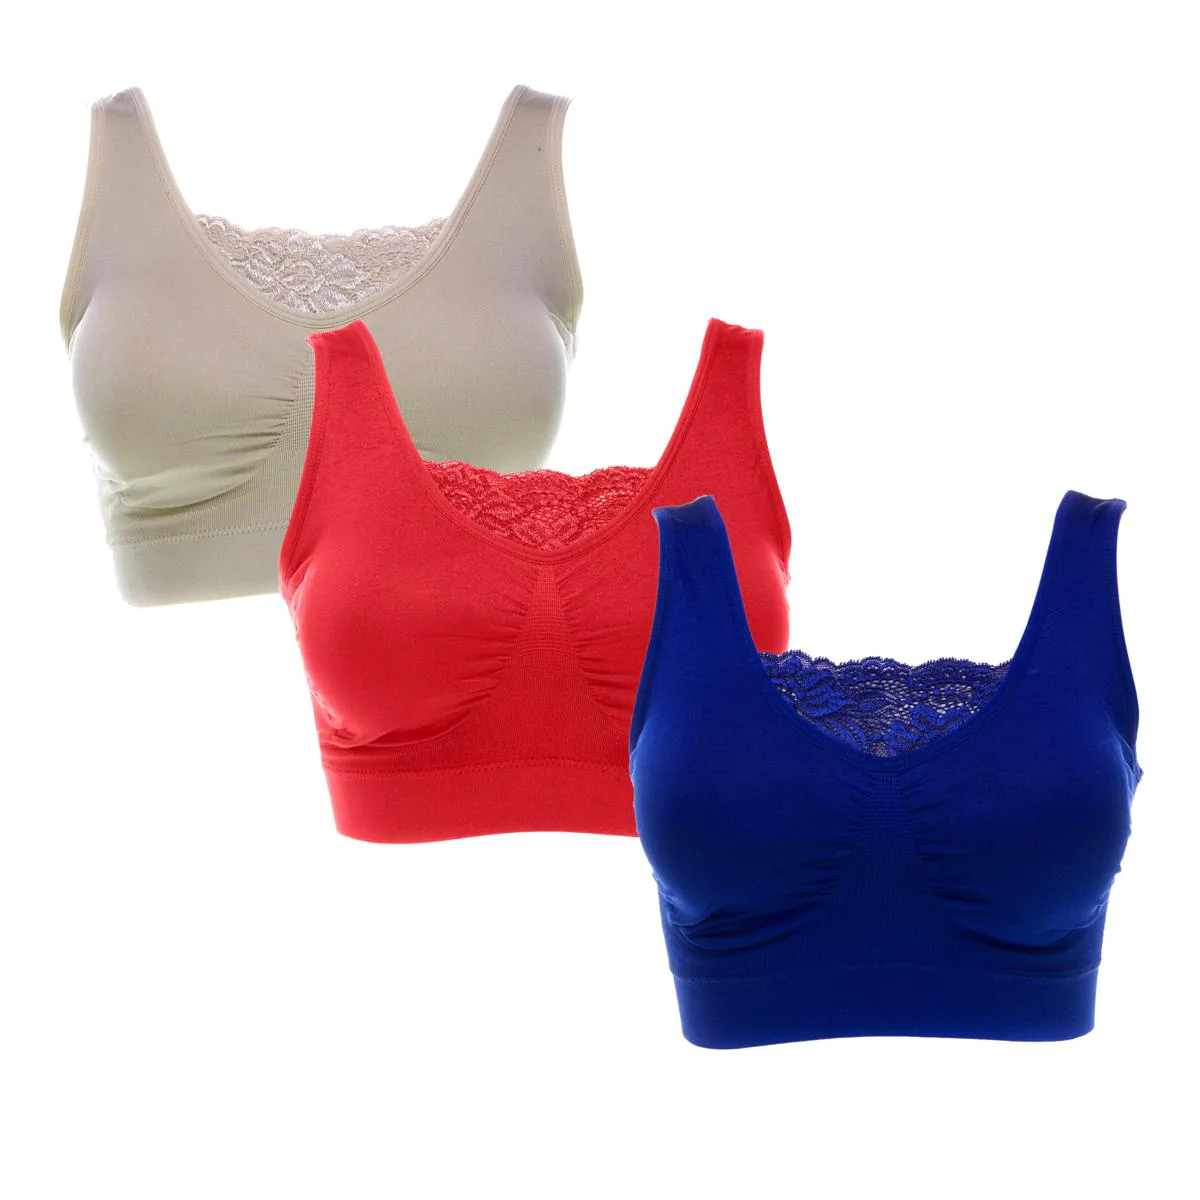 Rhonda Shear Ahh Bra 3-pack with Lace Inset 586821-J